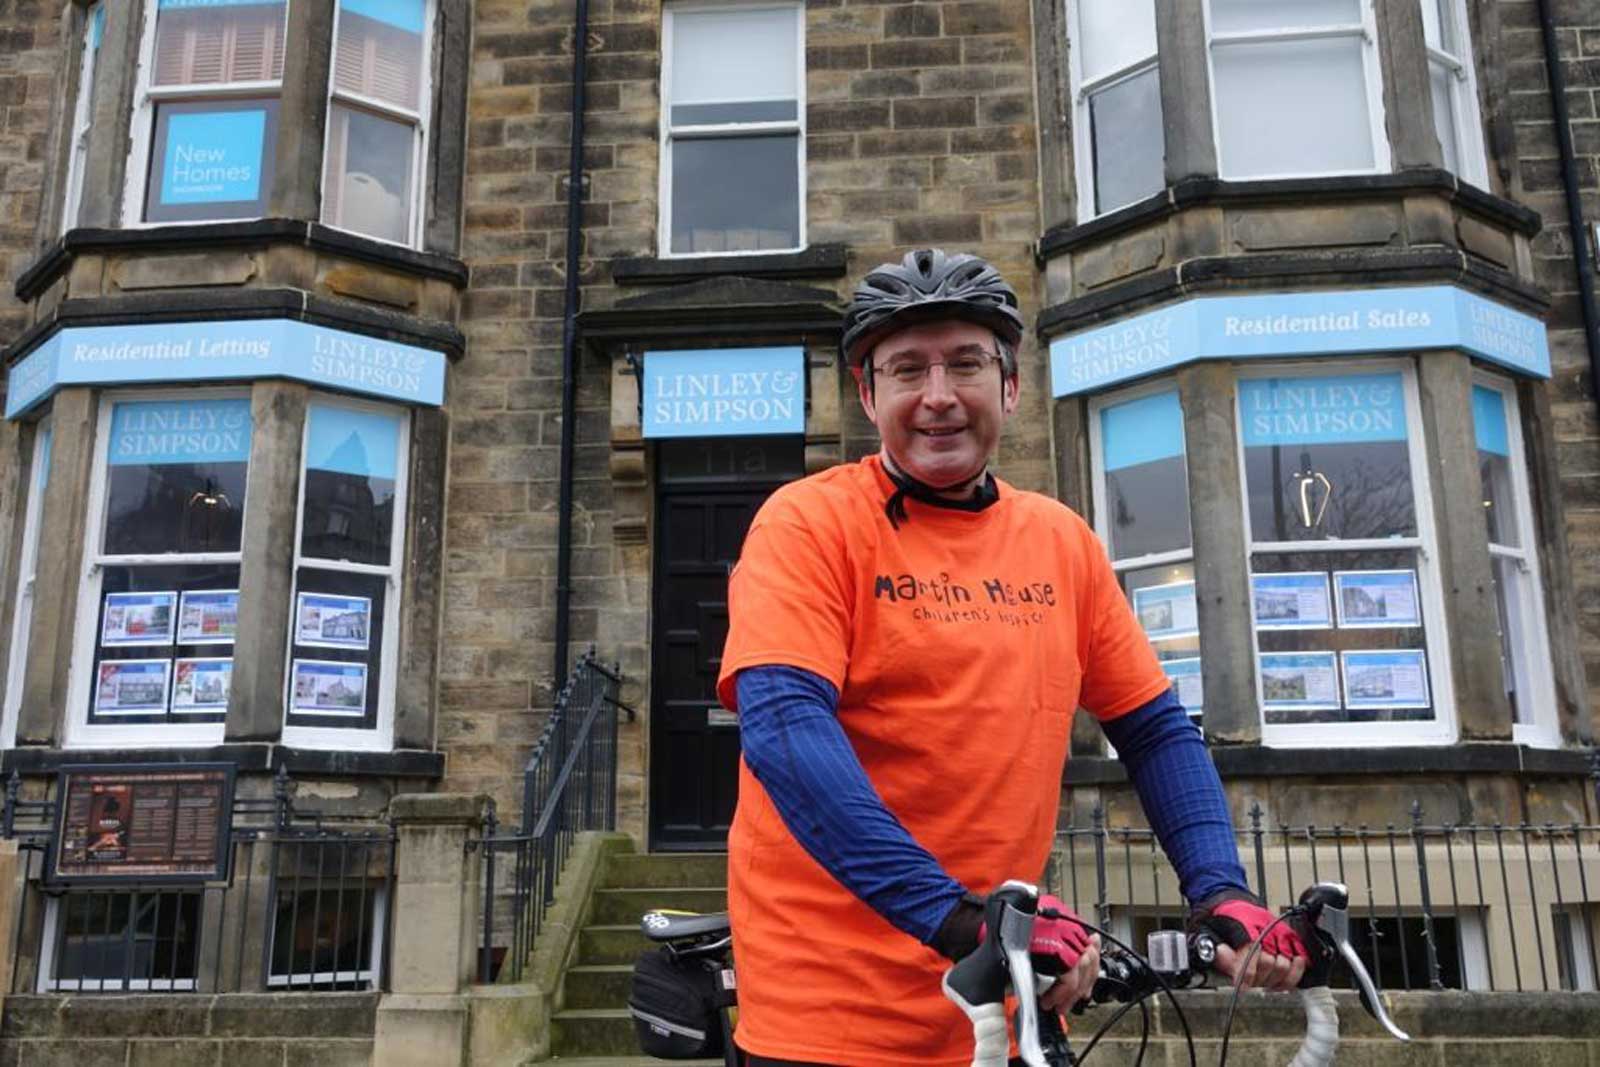 Mark, Head of Residential Sales at the independent agency’s 11 Yorkshire branches, will be experiencing a different kind of waterside activity by cycling the length of the canal from Liverpool to Leeds